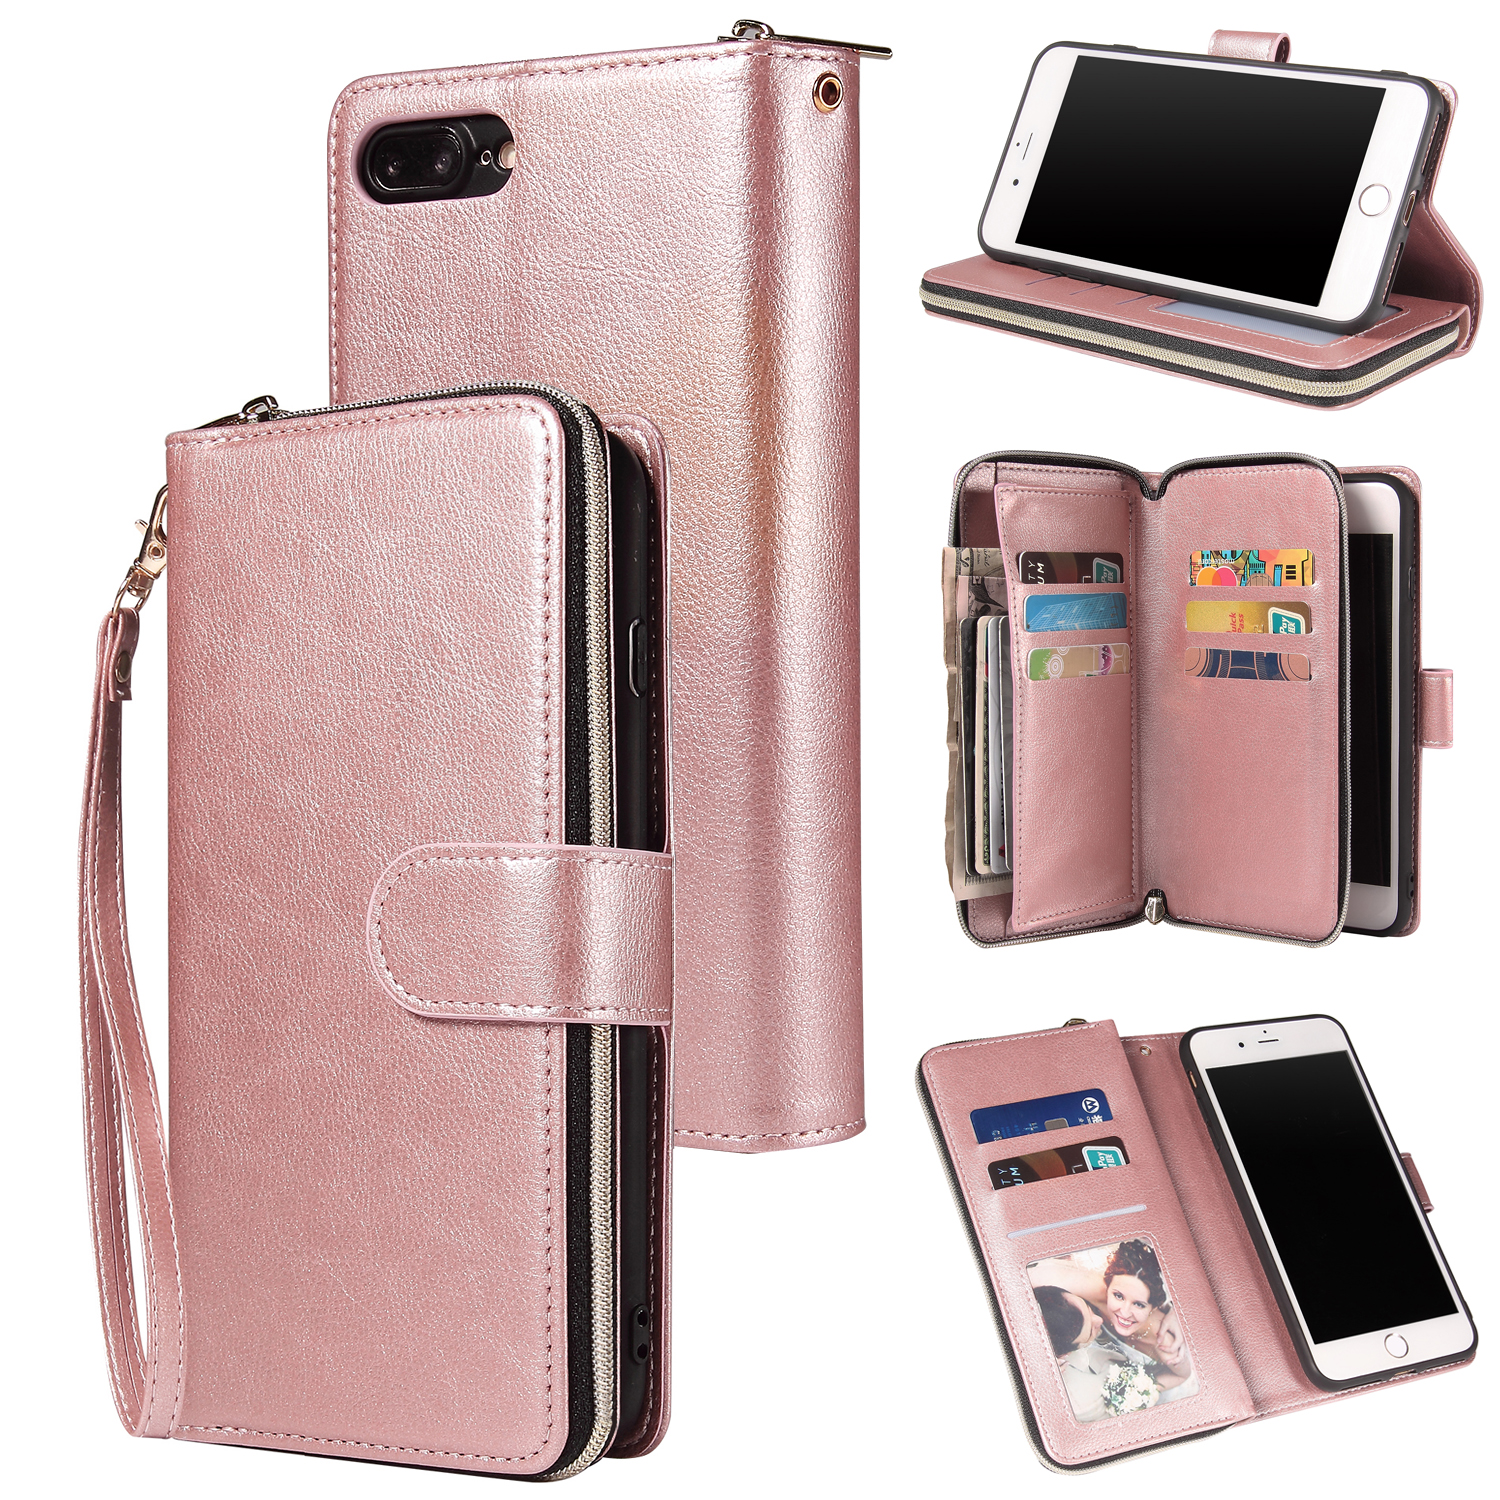 For Iphone 6/6s/6 Plus/6s Plus/7 Plus/8 Plus Pu Leather  Mobile Phone Cover Zipper Card Bag + Wrist Strap Rose gold